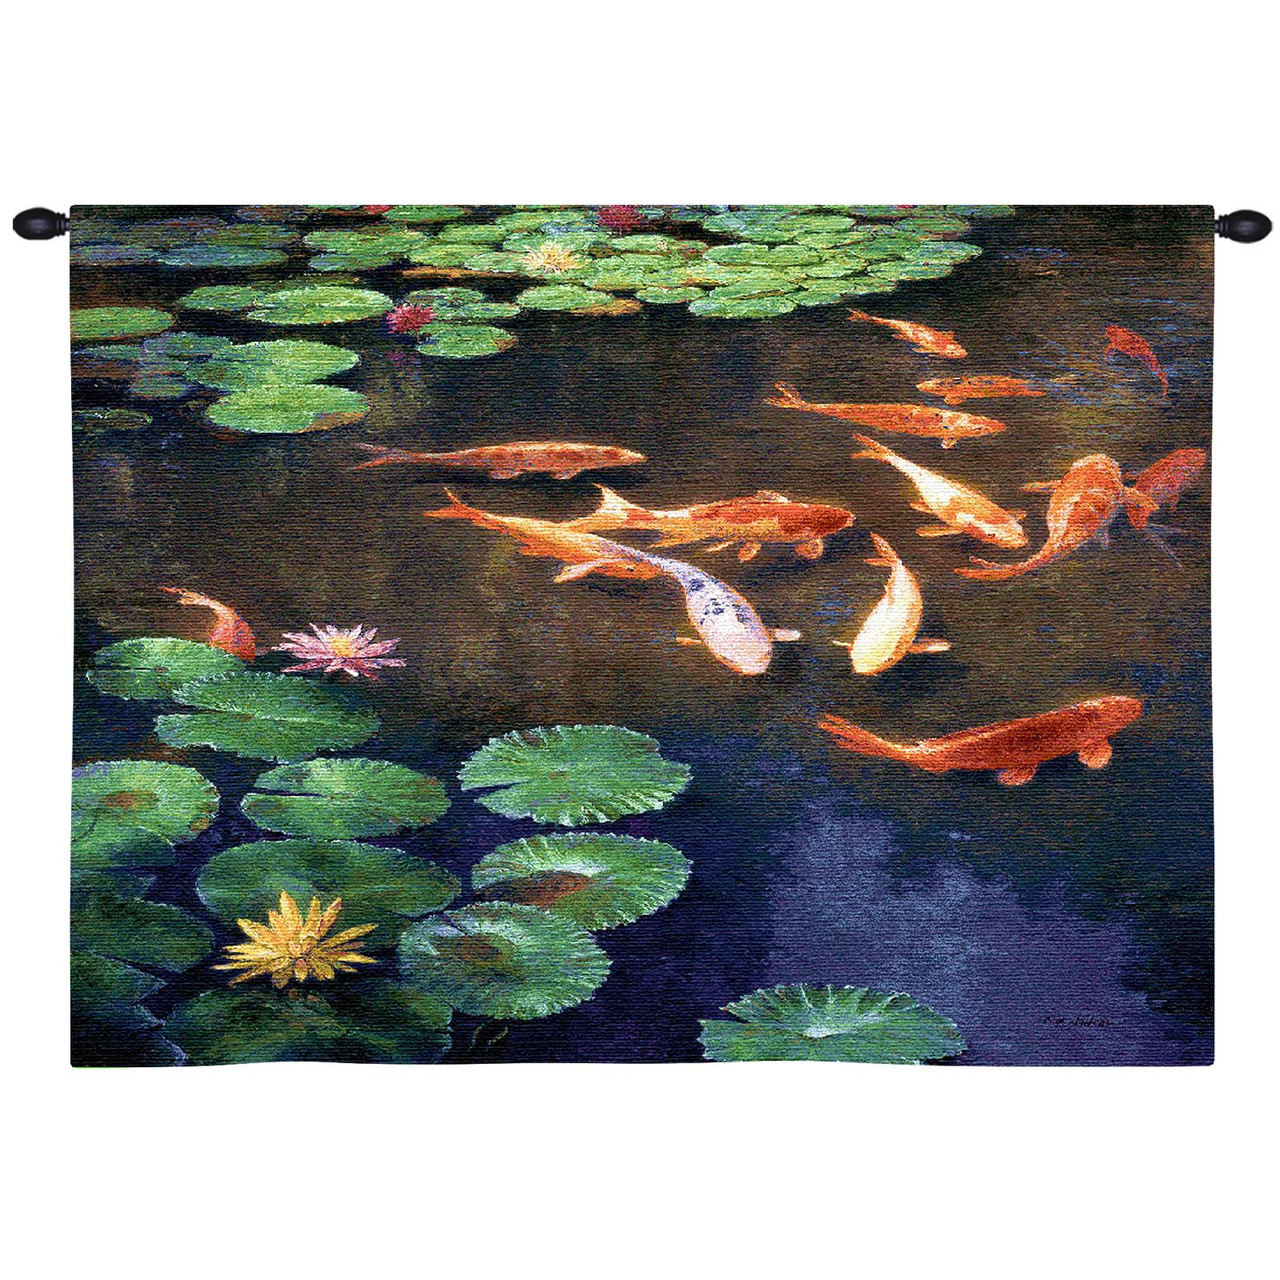 Inclinations by Curt Walters  Woven Tapestry Wall Art Hanging